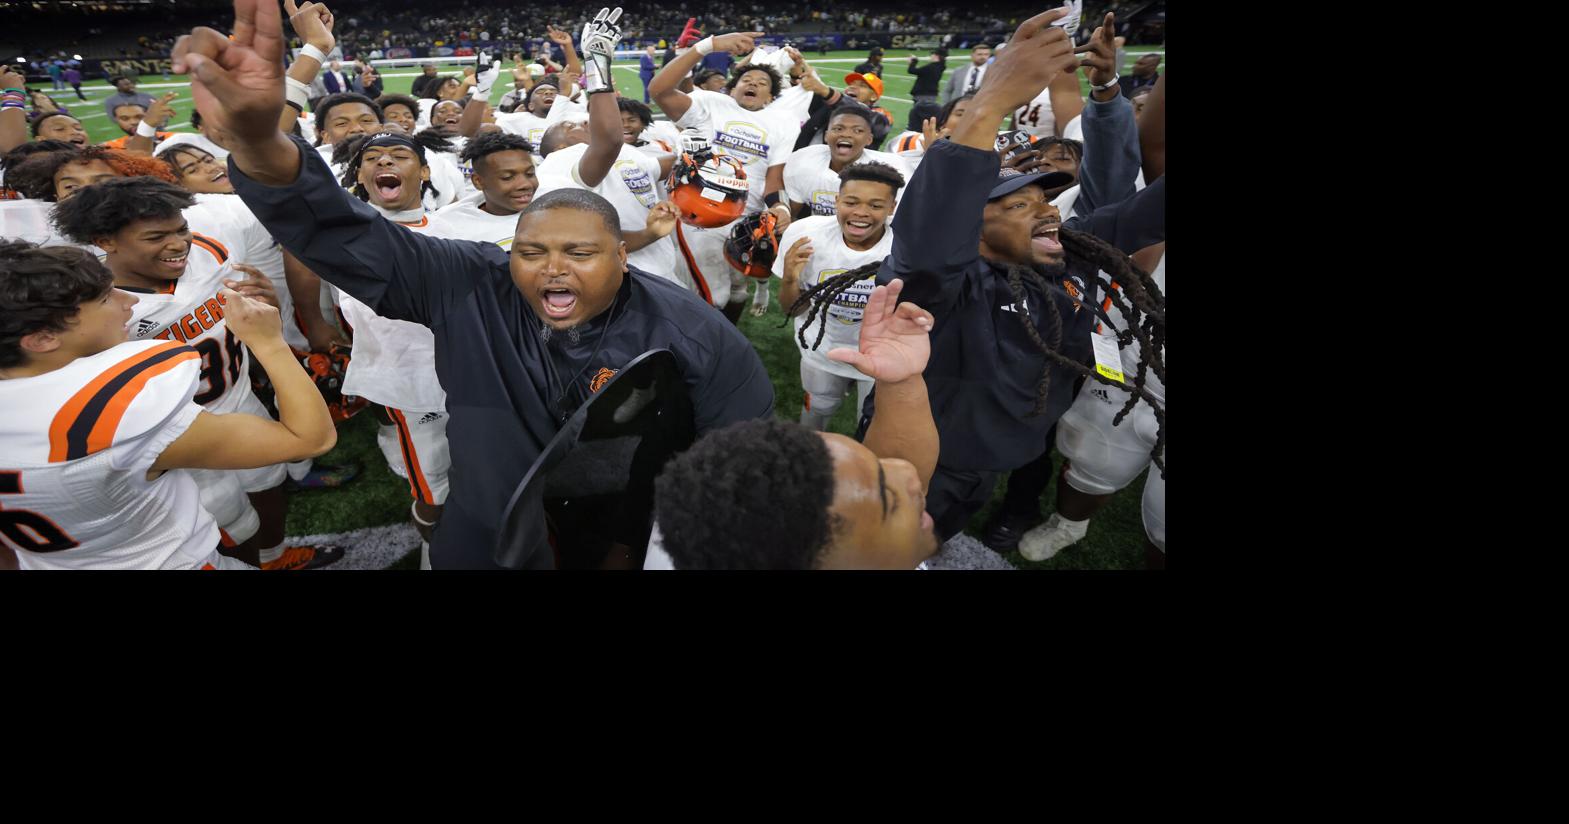 Opelousas Football Coach Sues LHSAA Over Stripped State Title Controversy